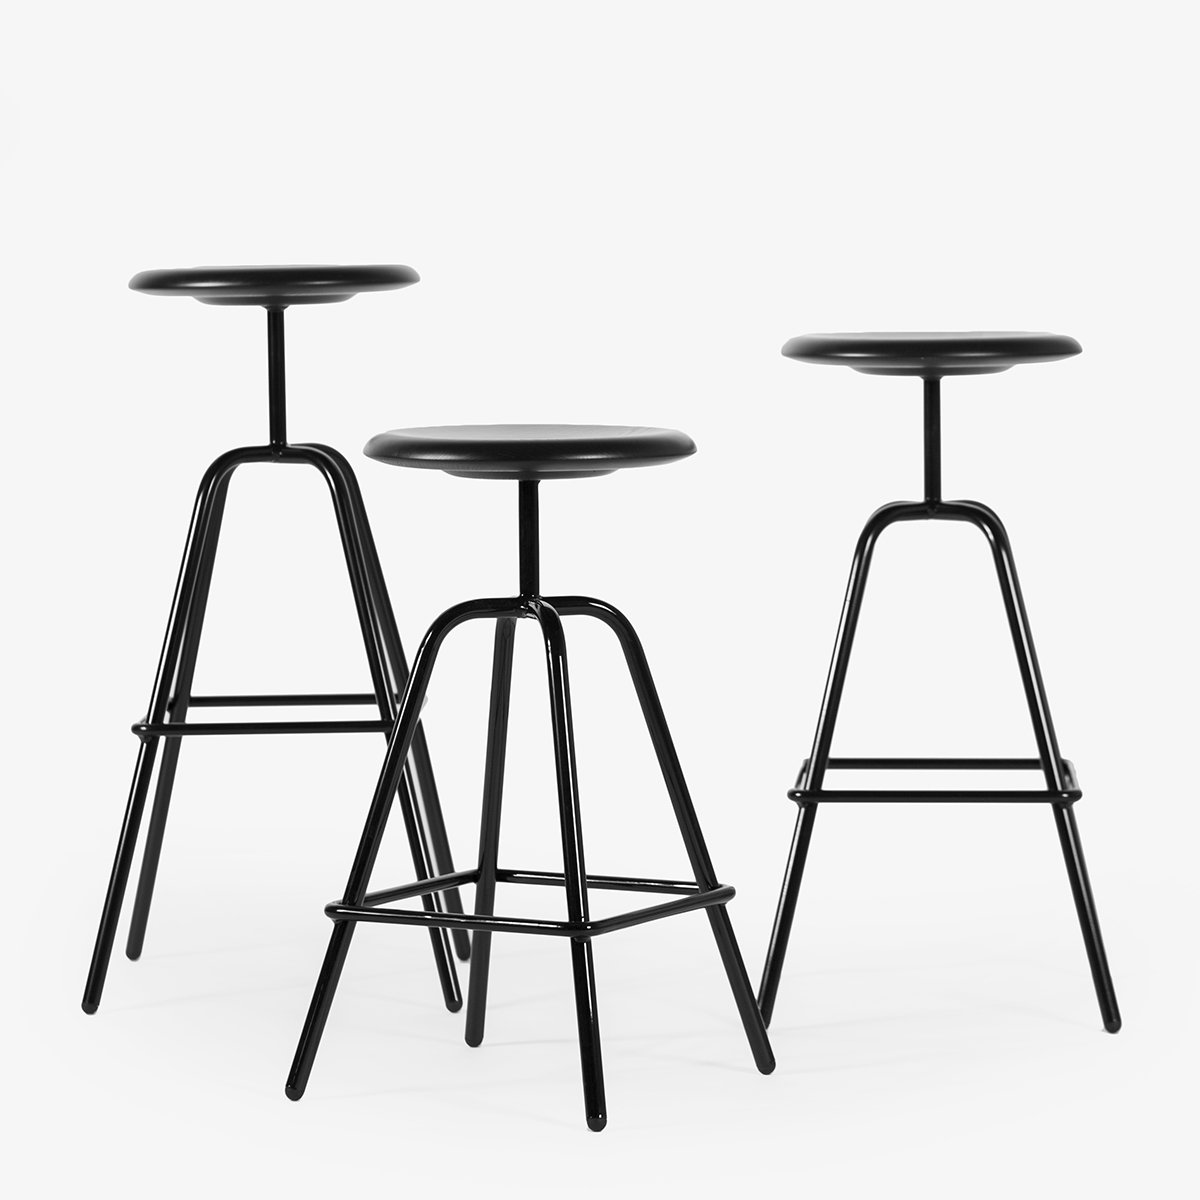 This stool is inspired by the designs and models of industrial furniture of the ’30s.Simple, clear and timeless, the tubular steel frame is secure and robust on 4 legs. With its simple appearance, can be used in almost any home or professional places. The seat is made of solid wood shaped to ensure the right comfort.Simple, clear and timeless, the tubular steel frame is secure and robust on 4 legs. With its simple appearance, can be used in almost any home or professional places. The seat is made of solid wood shaped to ensure the right comfort.Simple, clear and timeless, the tubular steel frame is secure and robust on 4 legs. With its simple appearance, can be used in almost any home or professional places. The seat is made of solid wood shaped to ensure the right comfort.